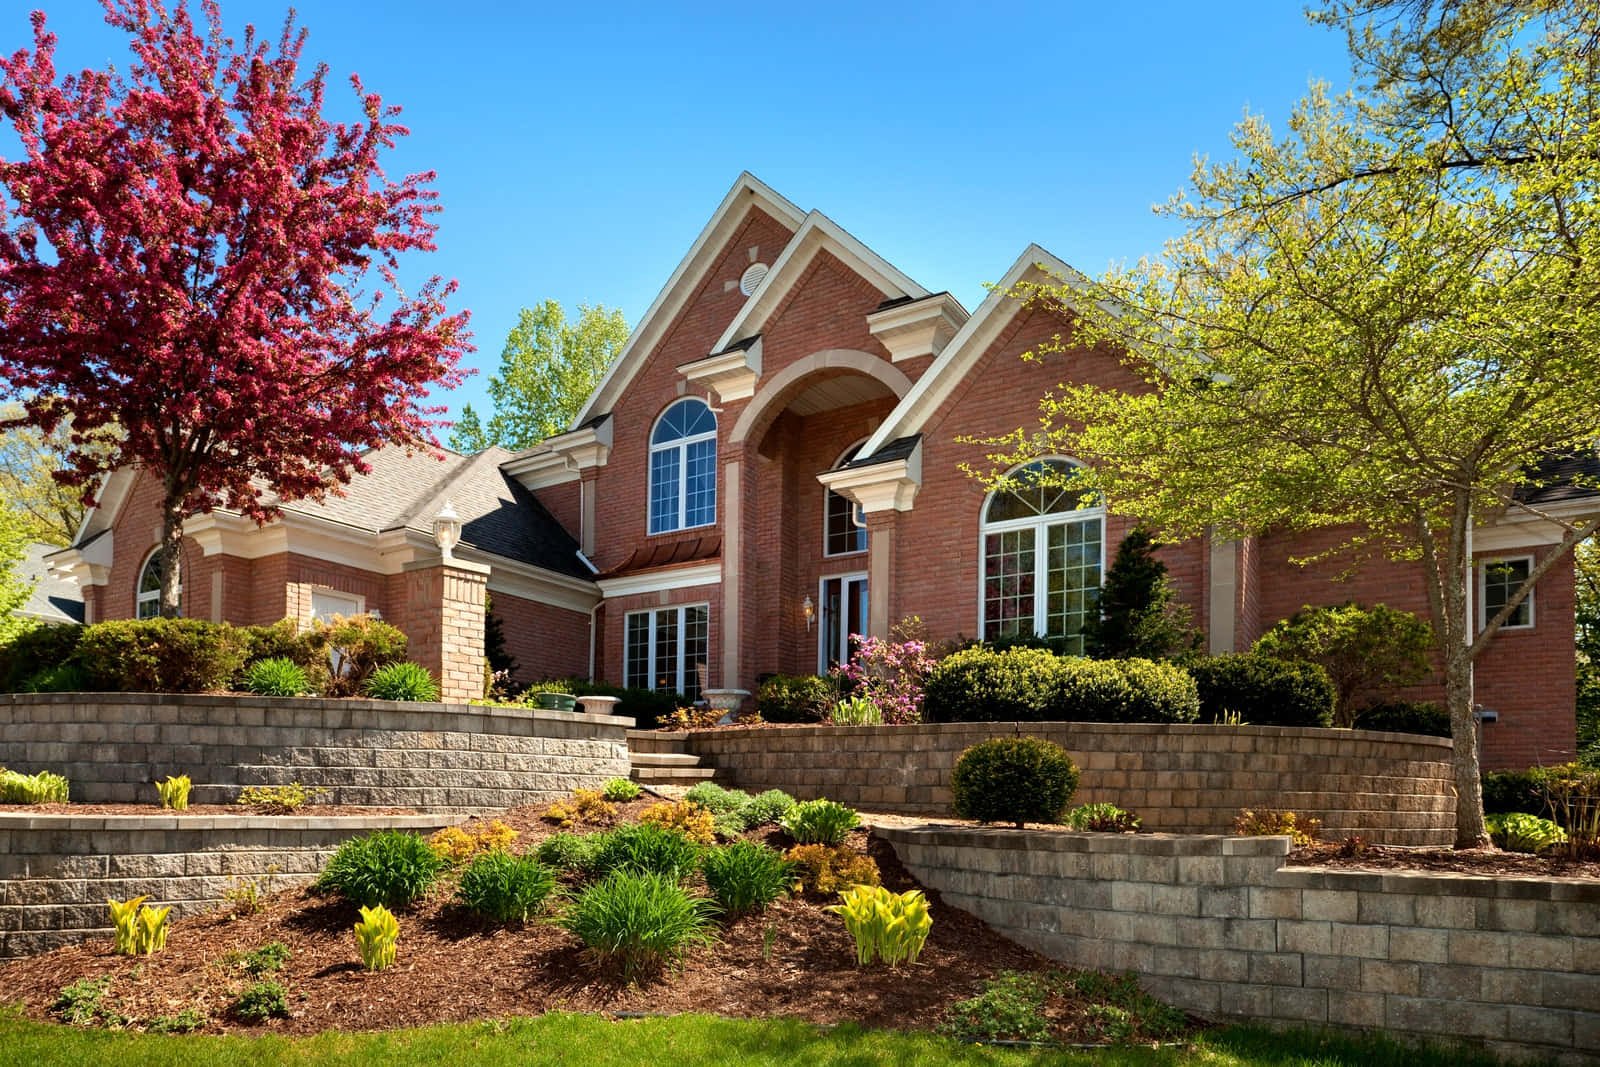 A Brick Home With A Stone Driveway And Landscaping